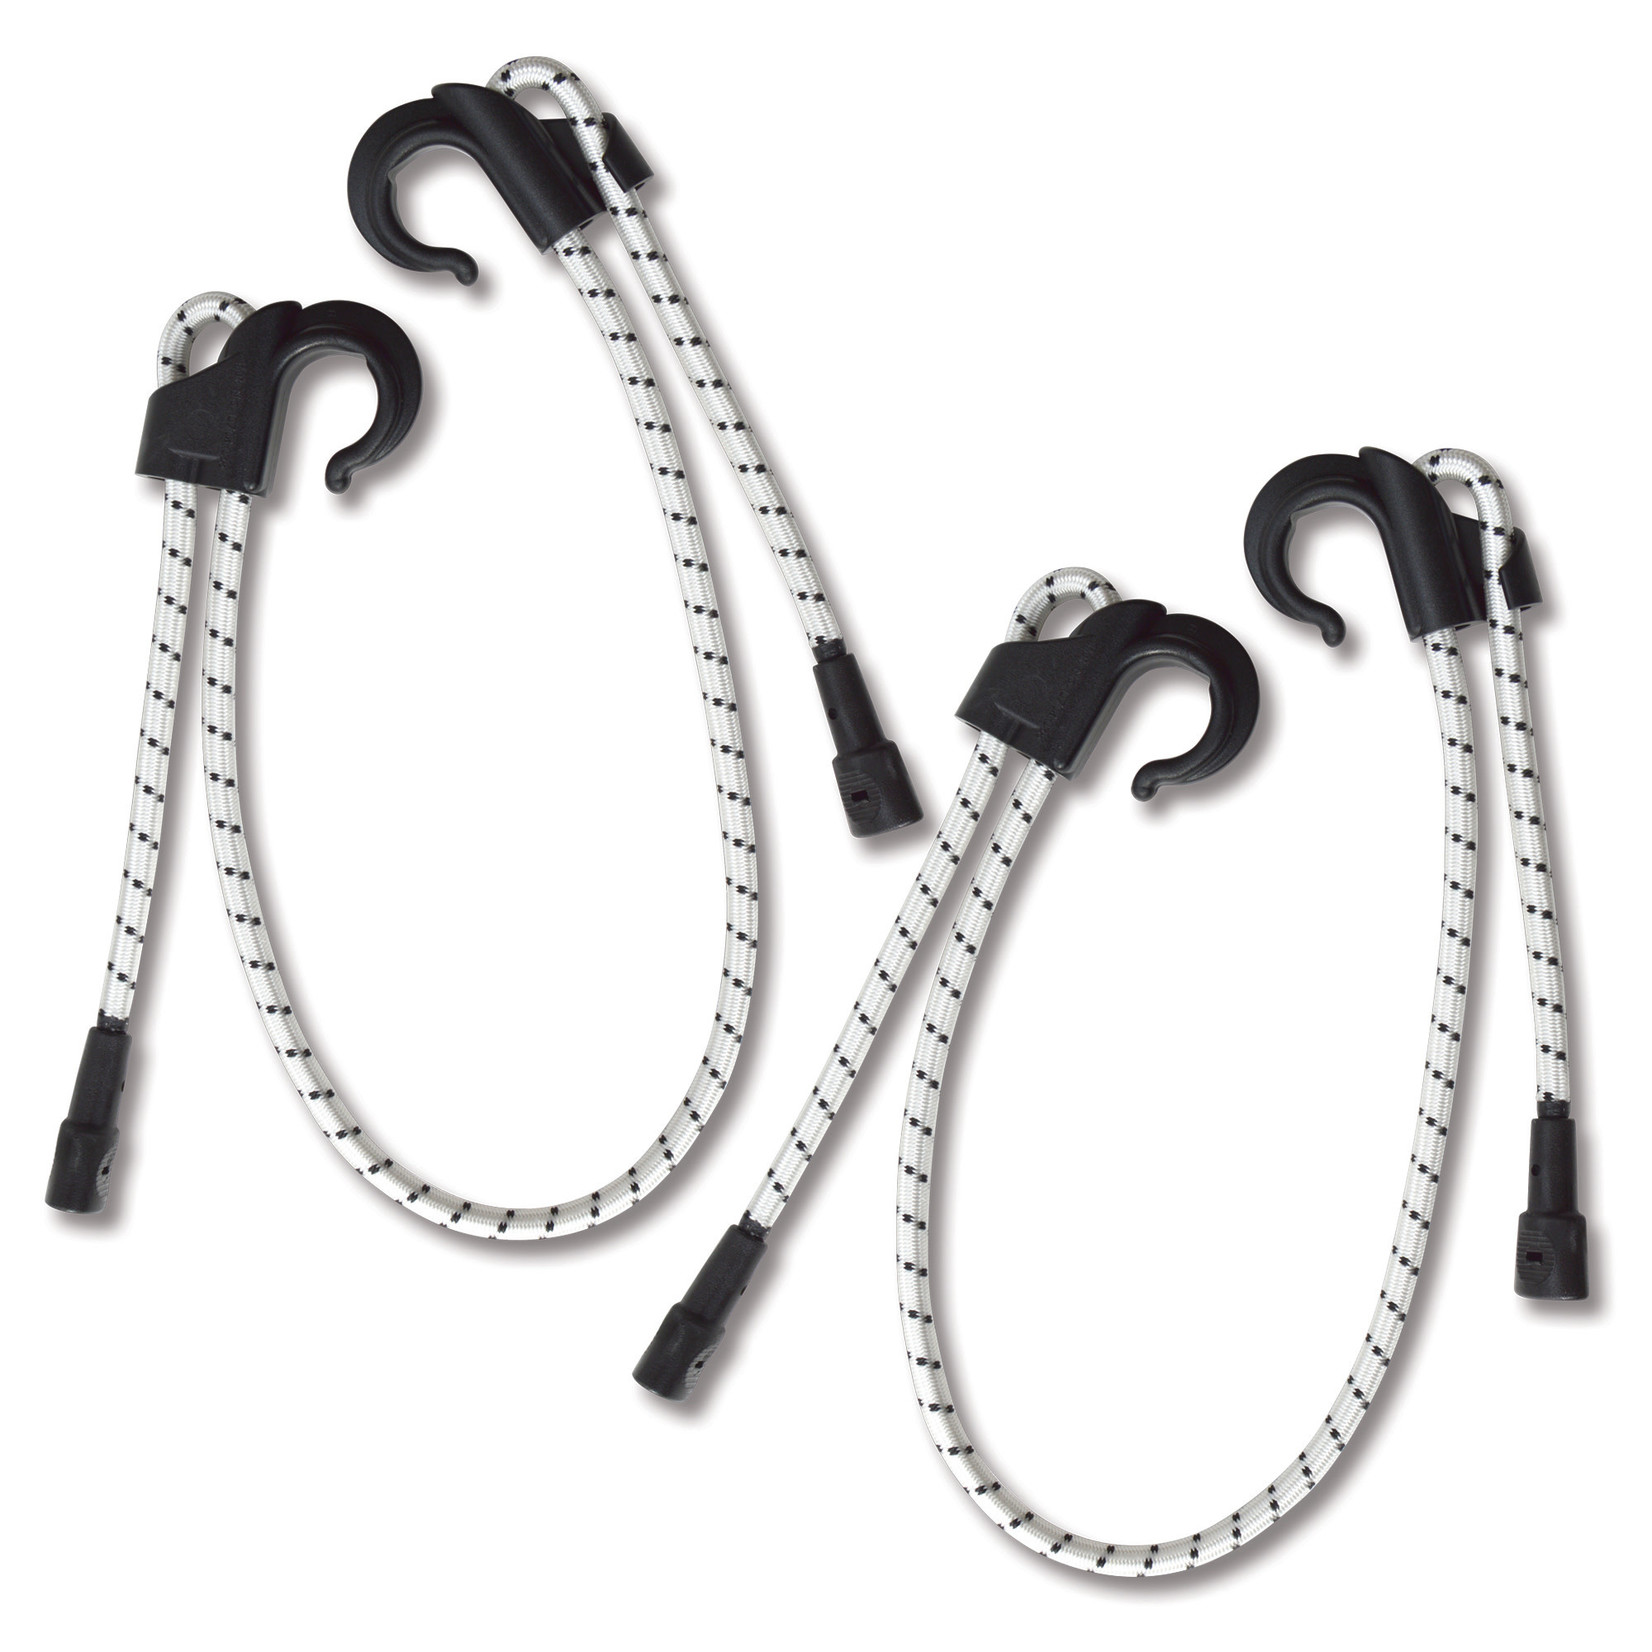 Bungee Cord Monkey Fingers Dura Plastic 6-60In Adjustable Double Pack Bk